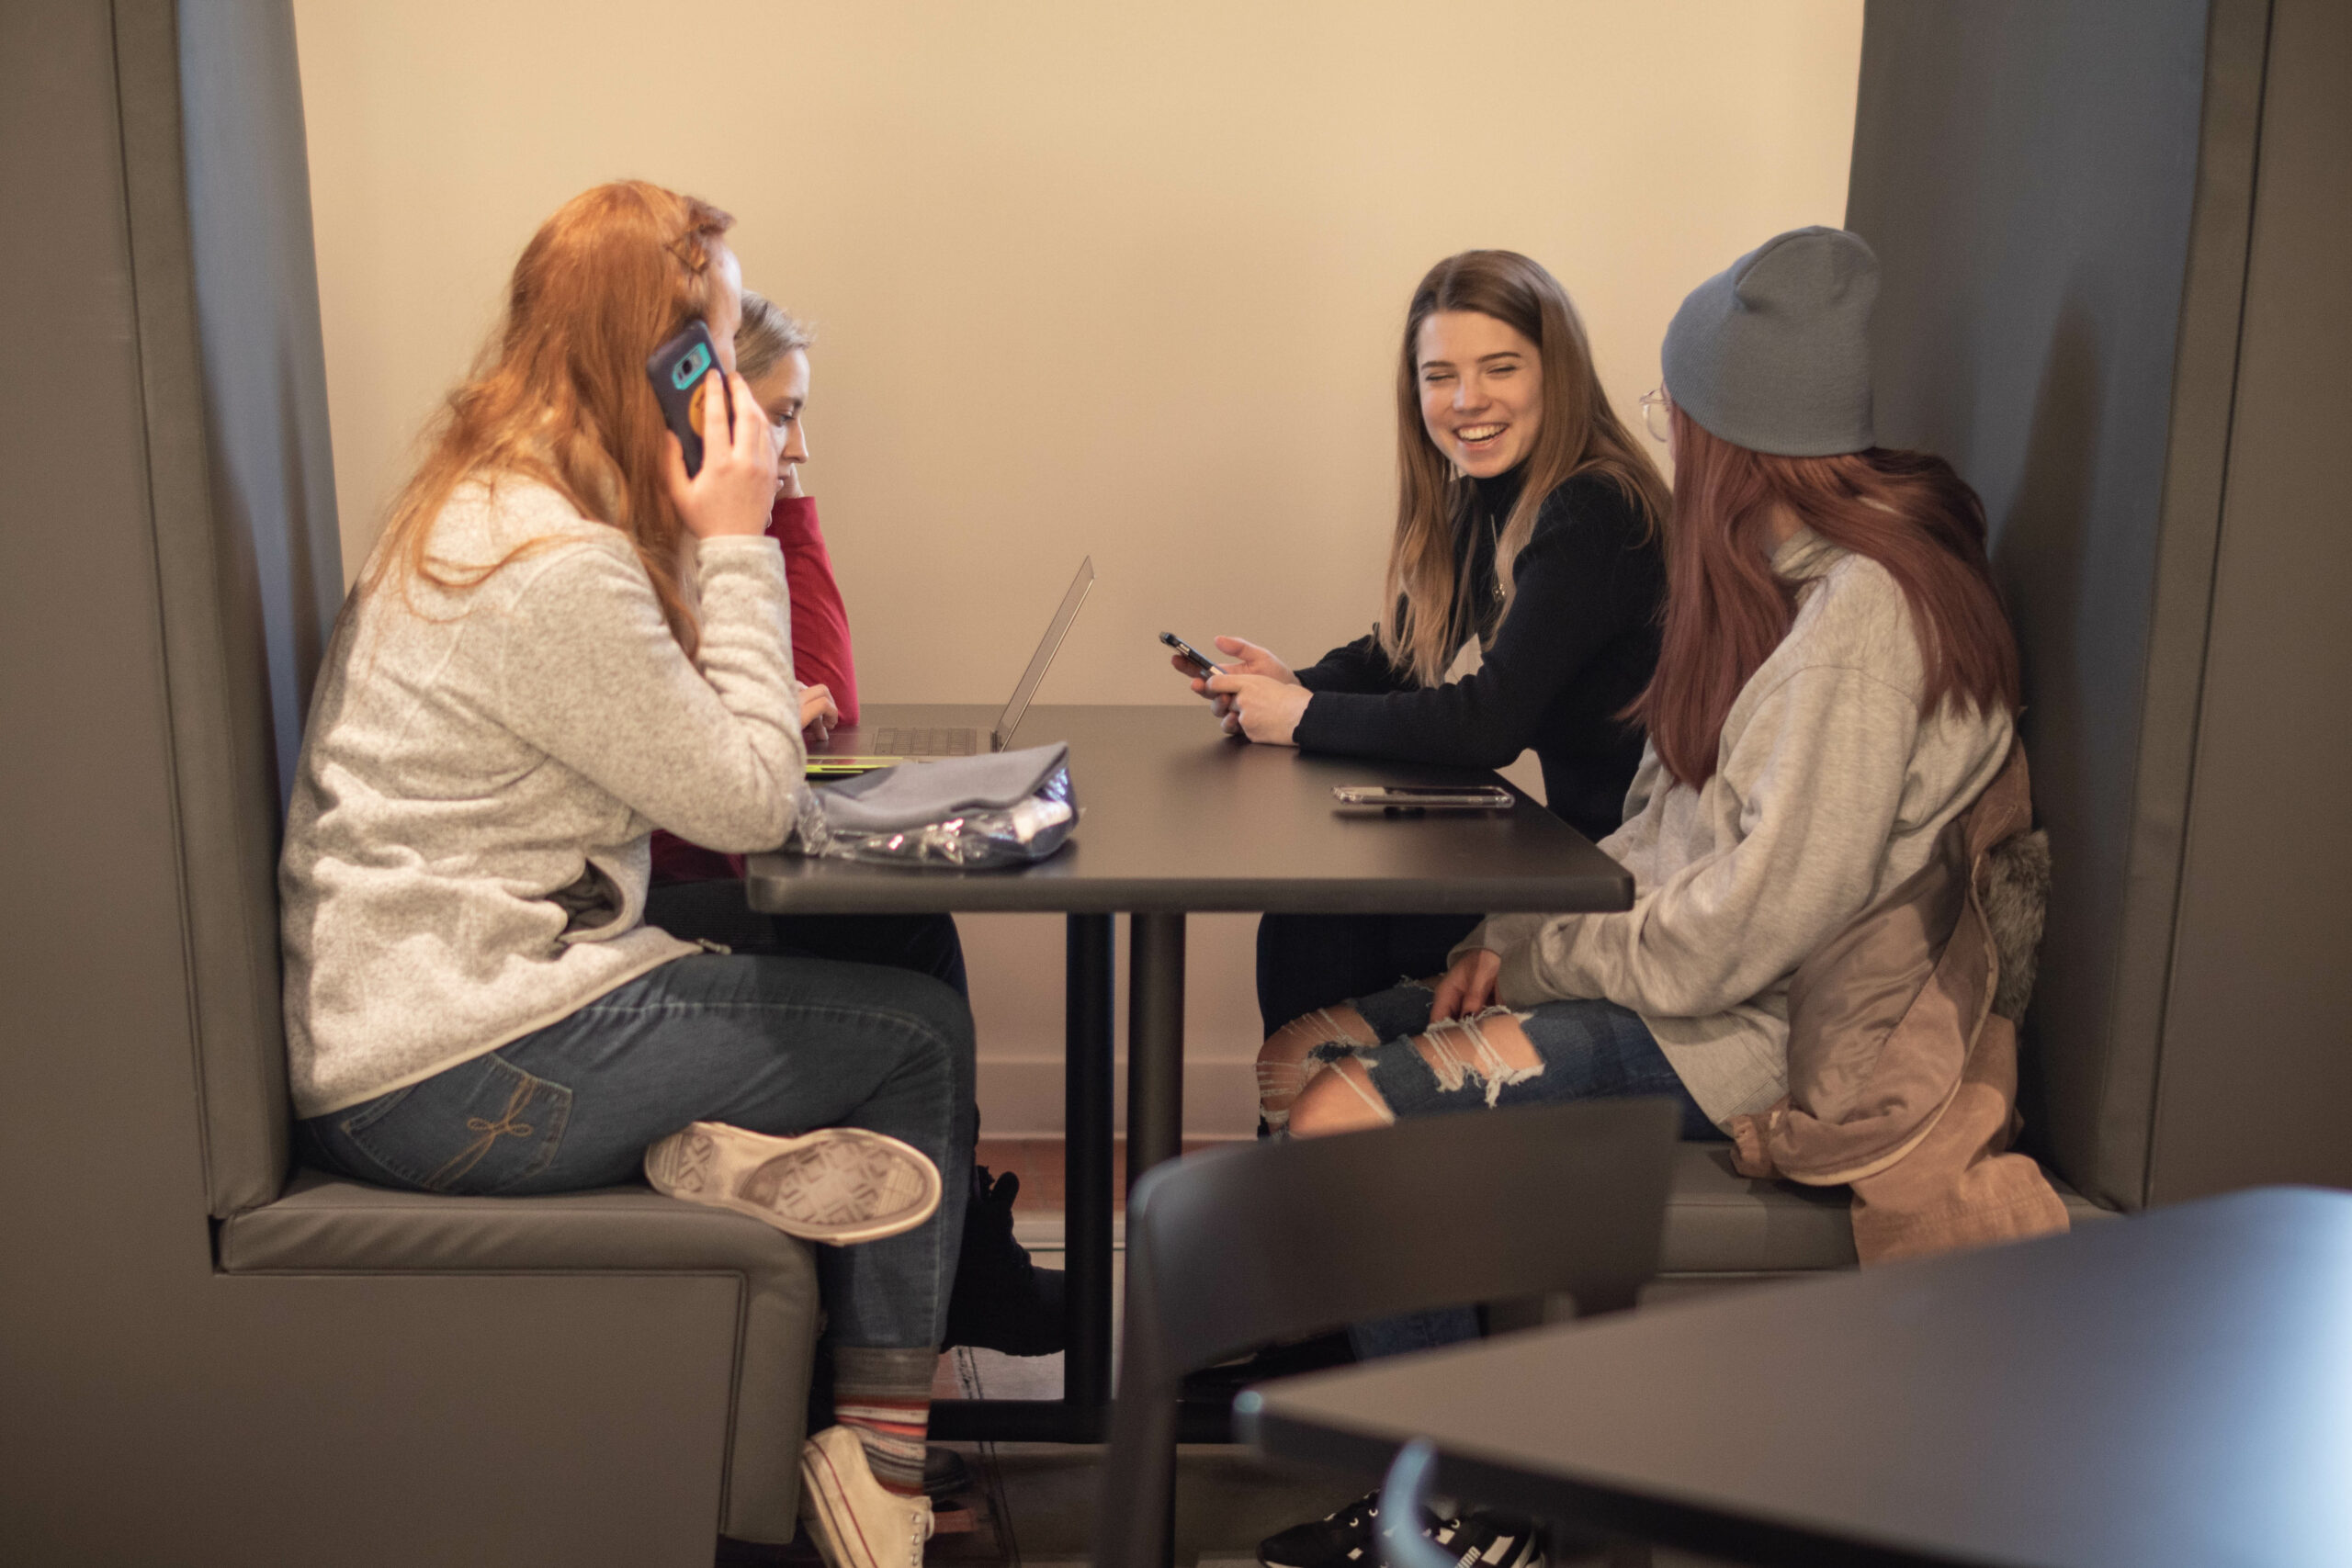 Beloit College is keeping social distancing top of mind as it plans for students to return to dining halls and dorms in the fall. 